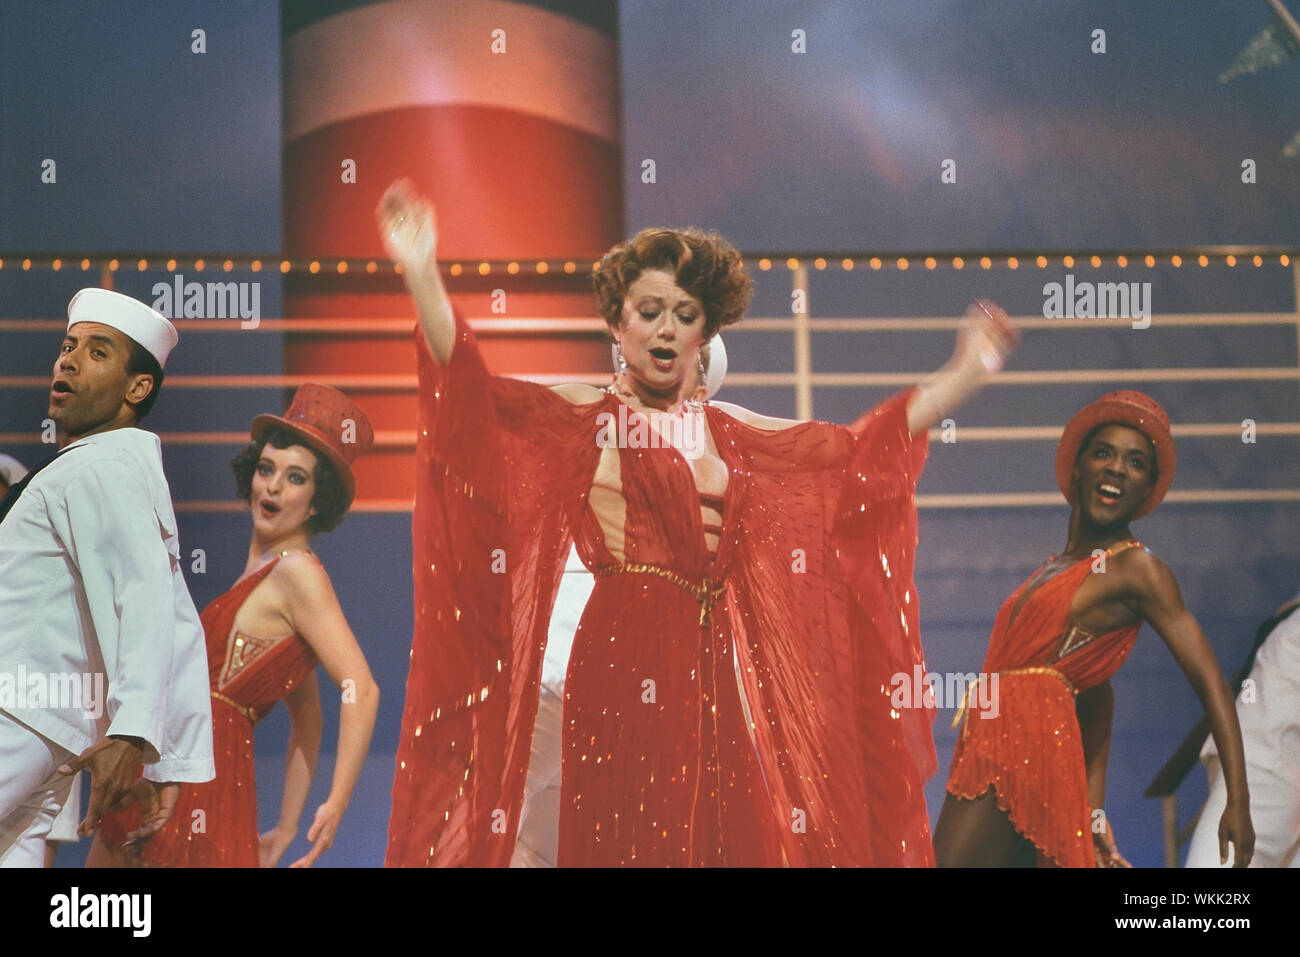 Elaine Paige dans Anything Goes, Prince Edward Theatre, Londres, Angleterre, Royaume-Uni. Circa 1990 Banque D'Images